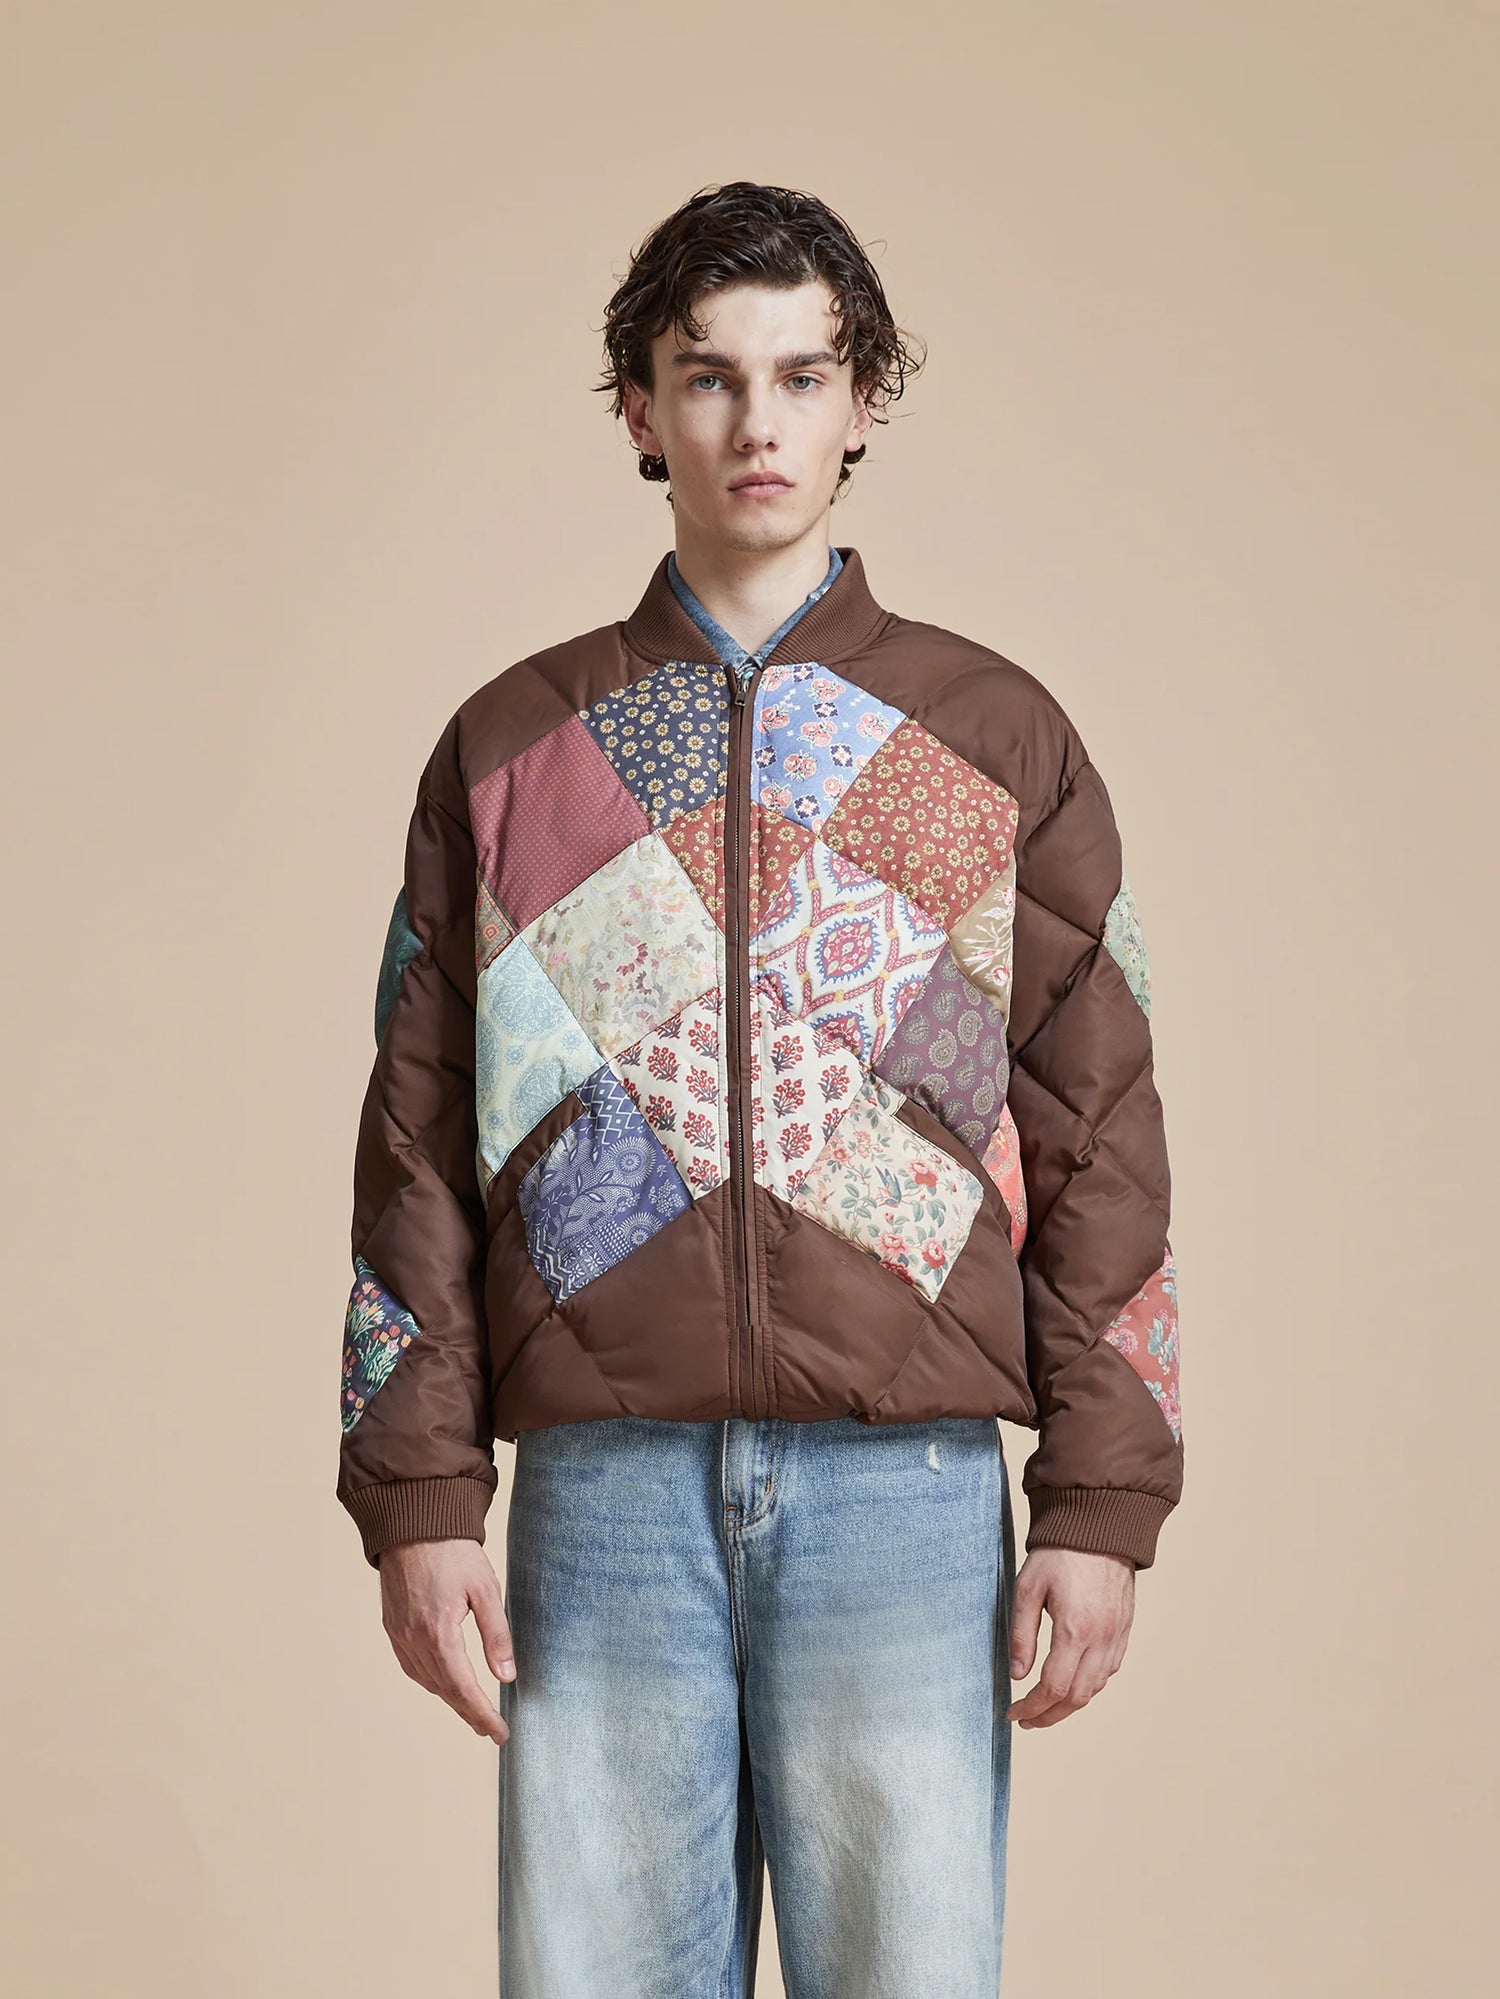 A man wearing a Found Diamond Quilt Patchwork Jacket and jeans.